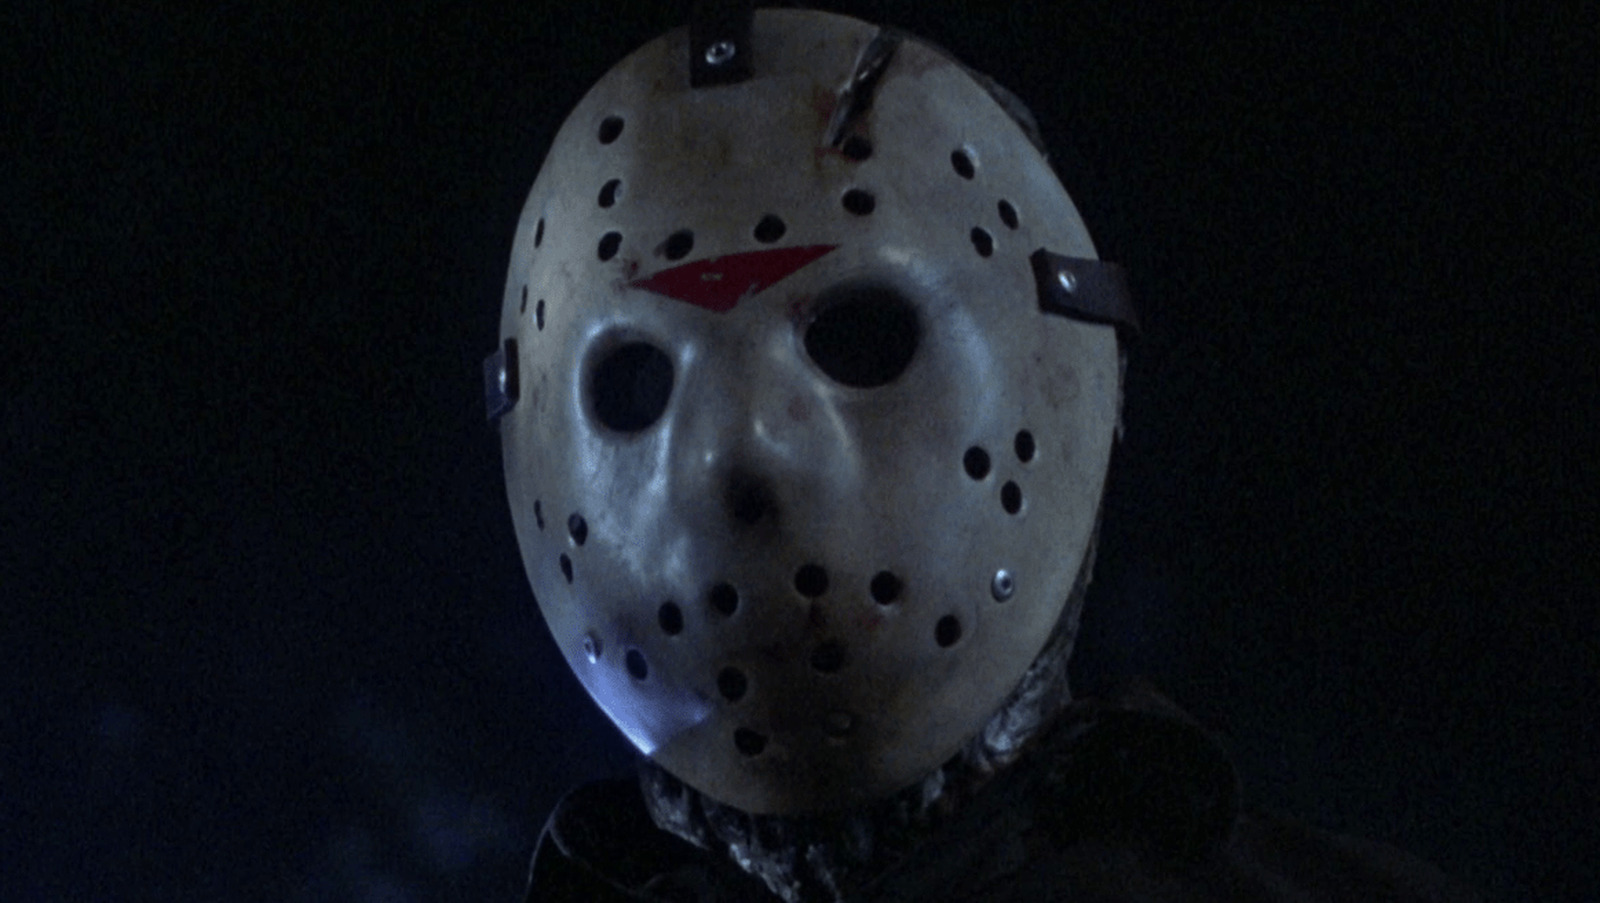 What Jason Voorhees From The Original Friday The 13th Looks Like Today